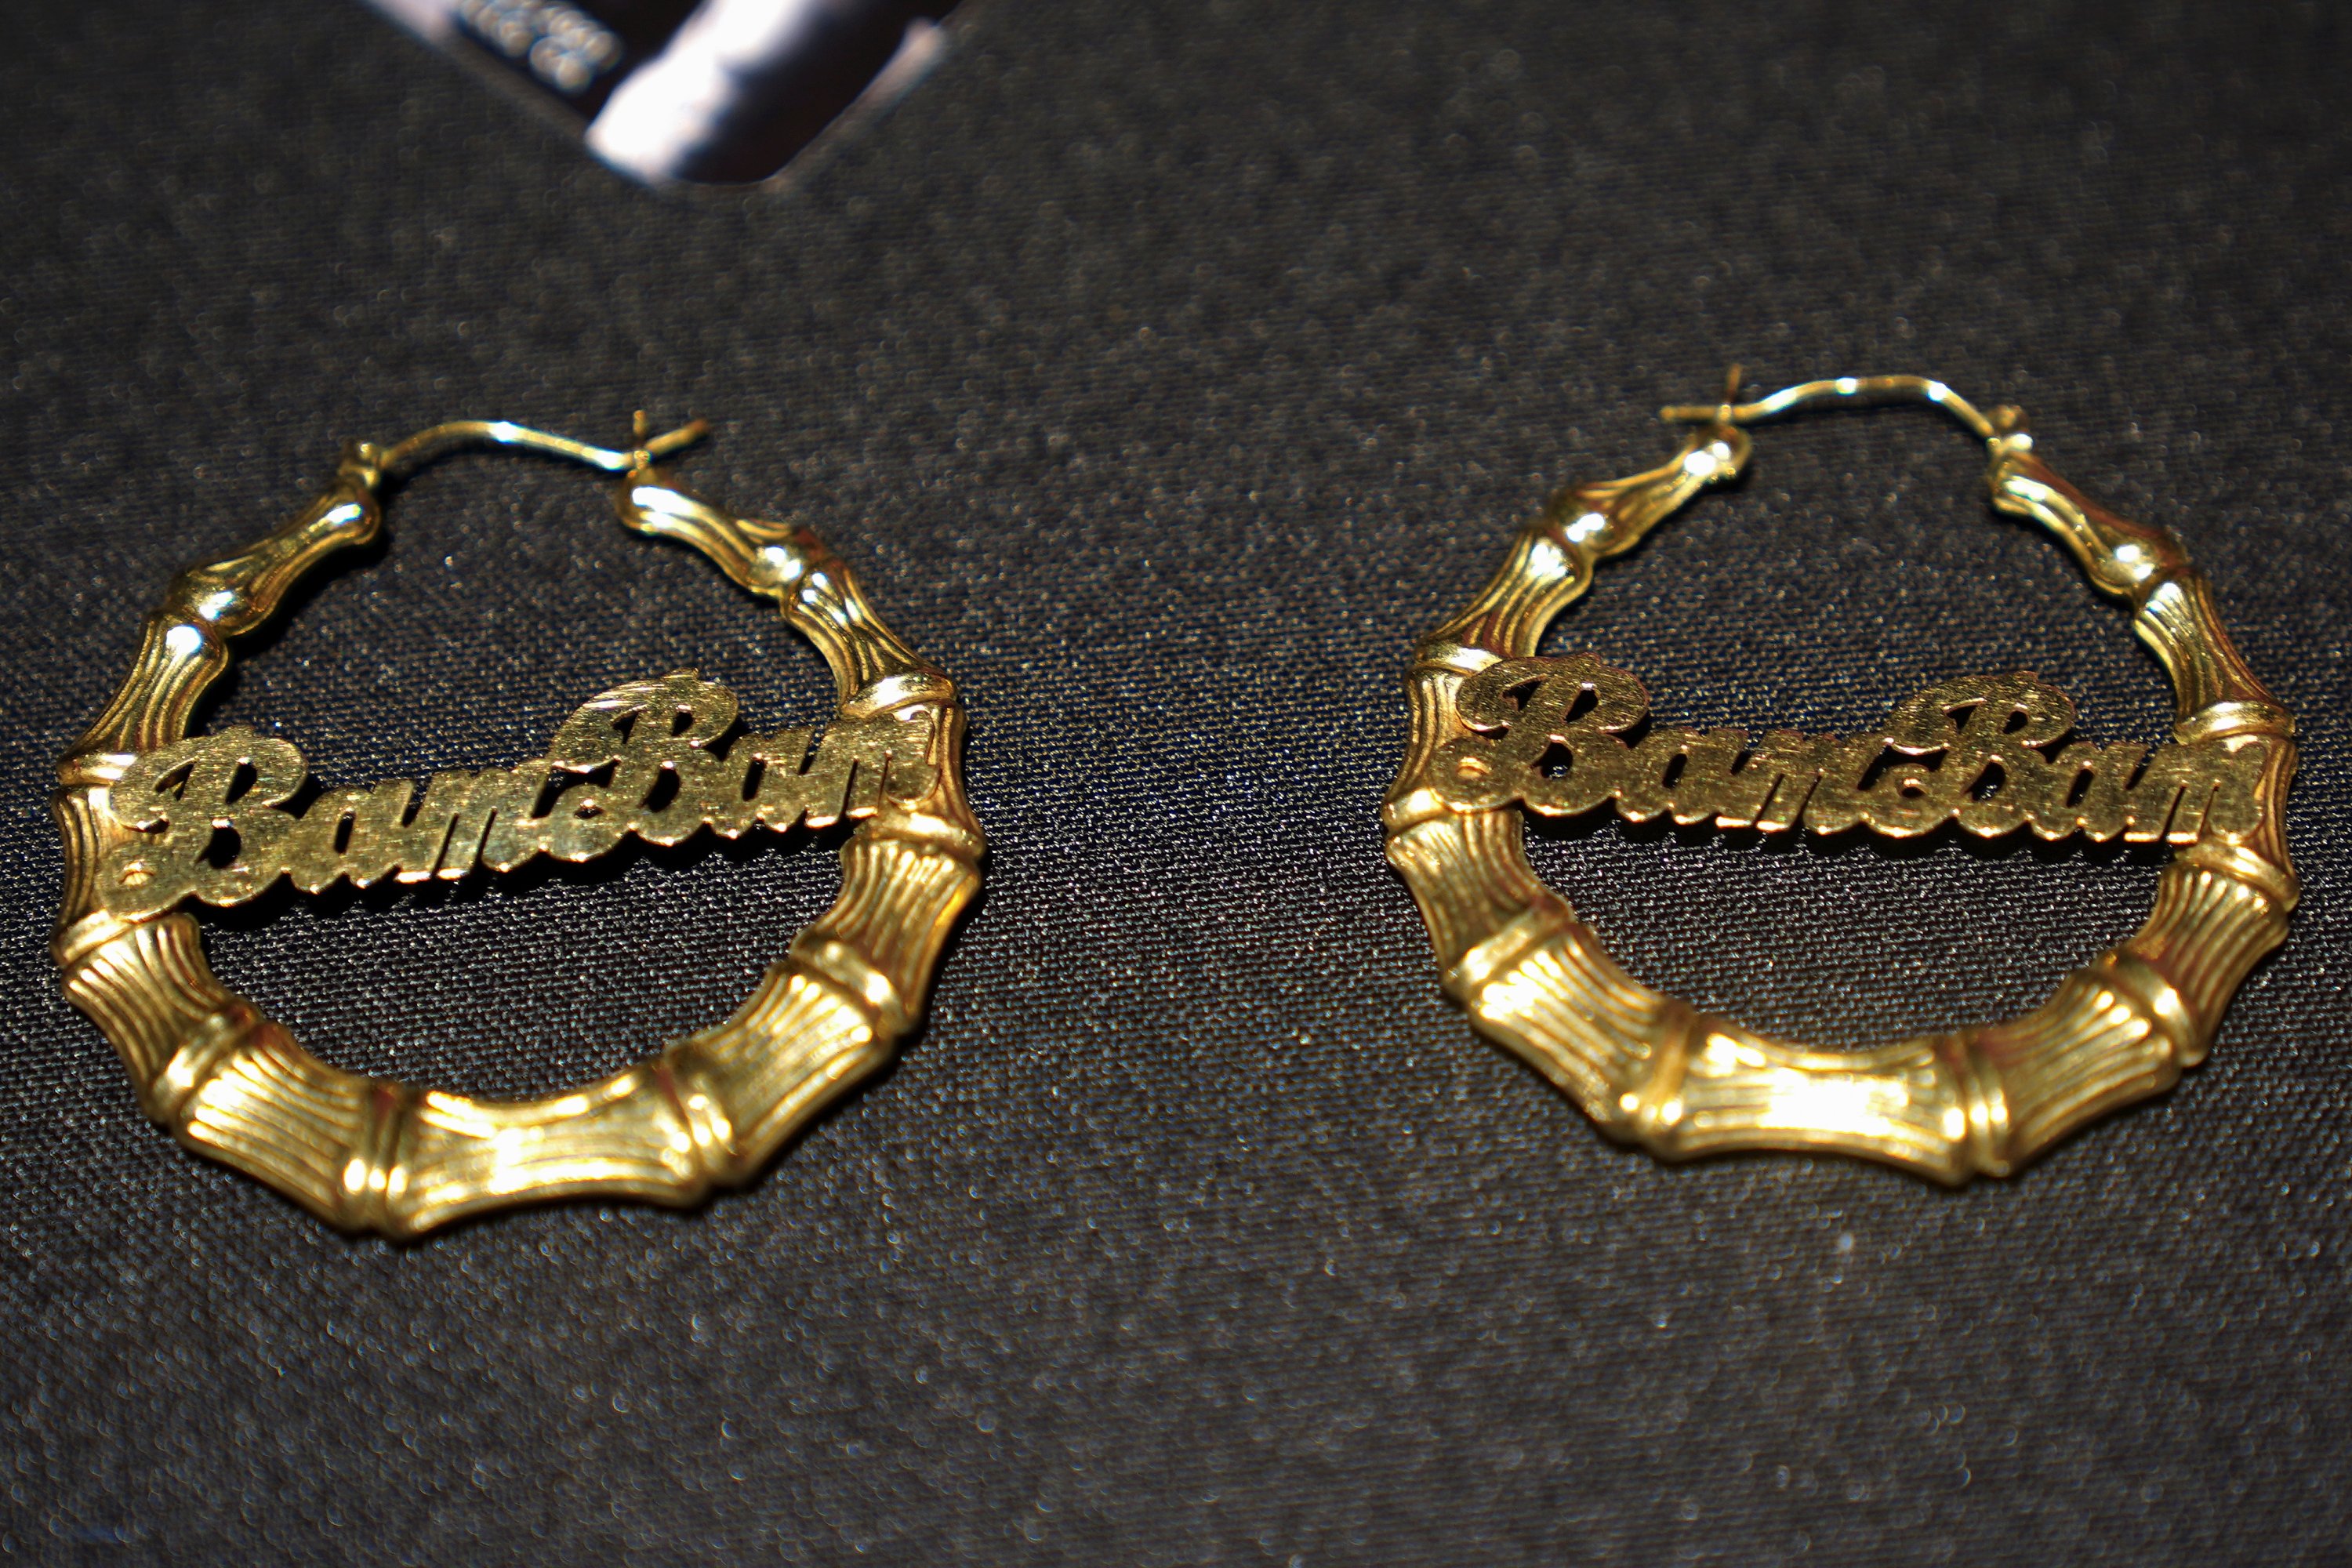 A pair of earrings worn by Amy Winehouse are pictured at a preview for an auction of her personal items on the 10th anniversary of her death in the Manhattan borough of New York City, New York, U.S., Oct. 11, 2021.  (REUTERS Photo)